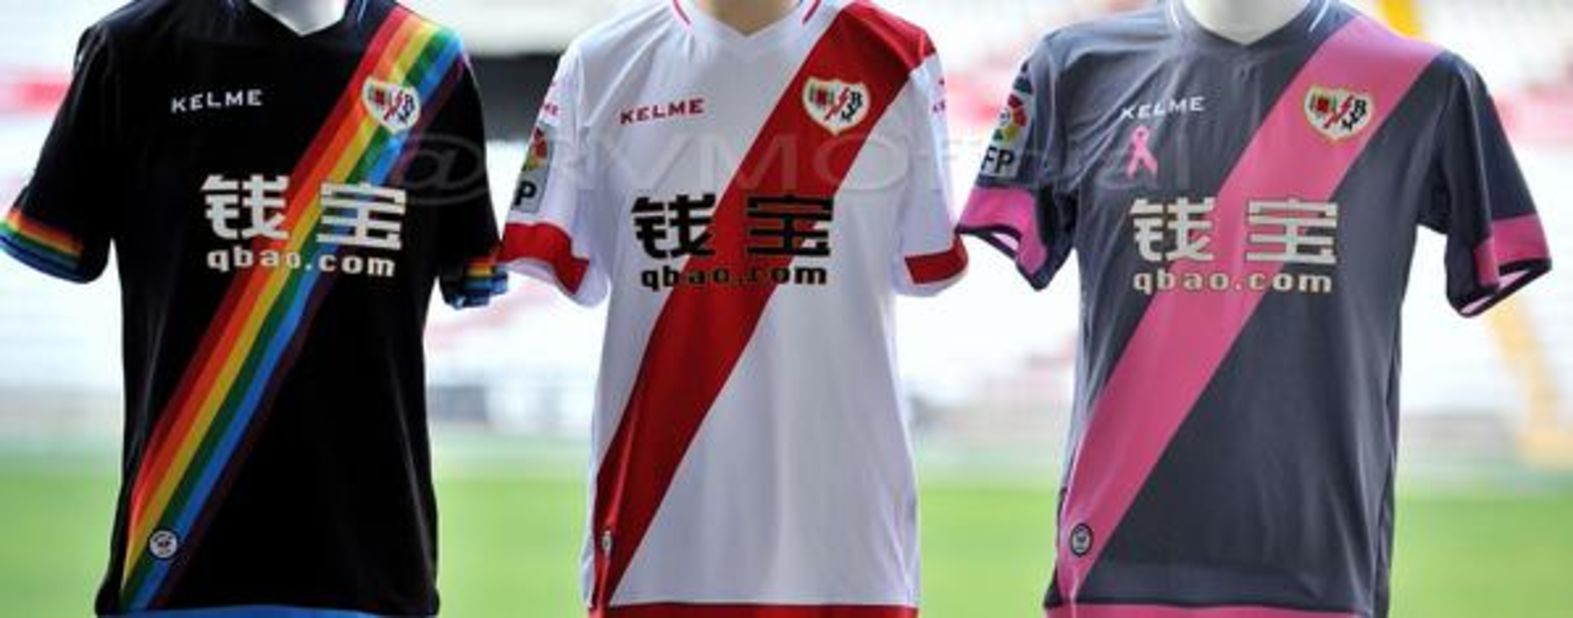 Rayo Vallecano unveiled its new strips for next season -- and its rainbow version brought about huge support on social media. Its sash consists of six different colors representing different causes within society. The rainbow represents those fighting against homophobia.